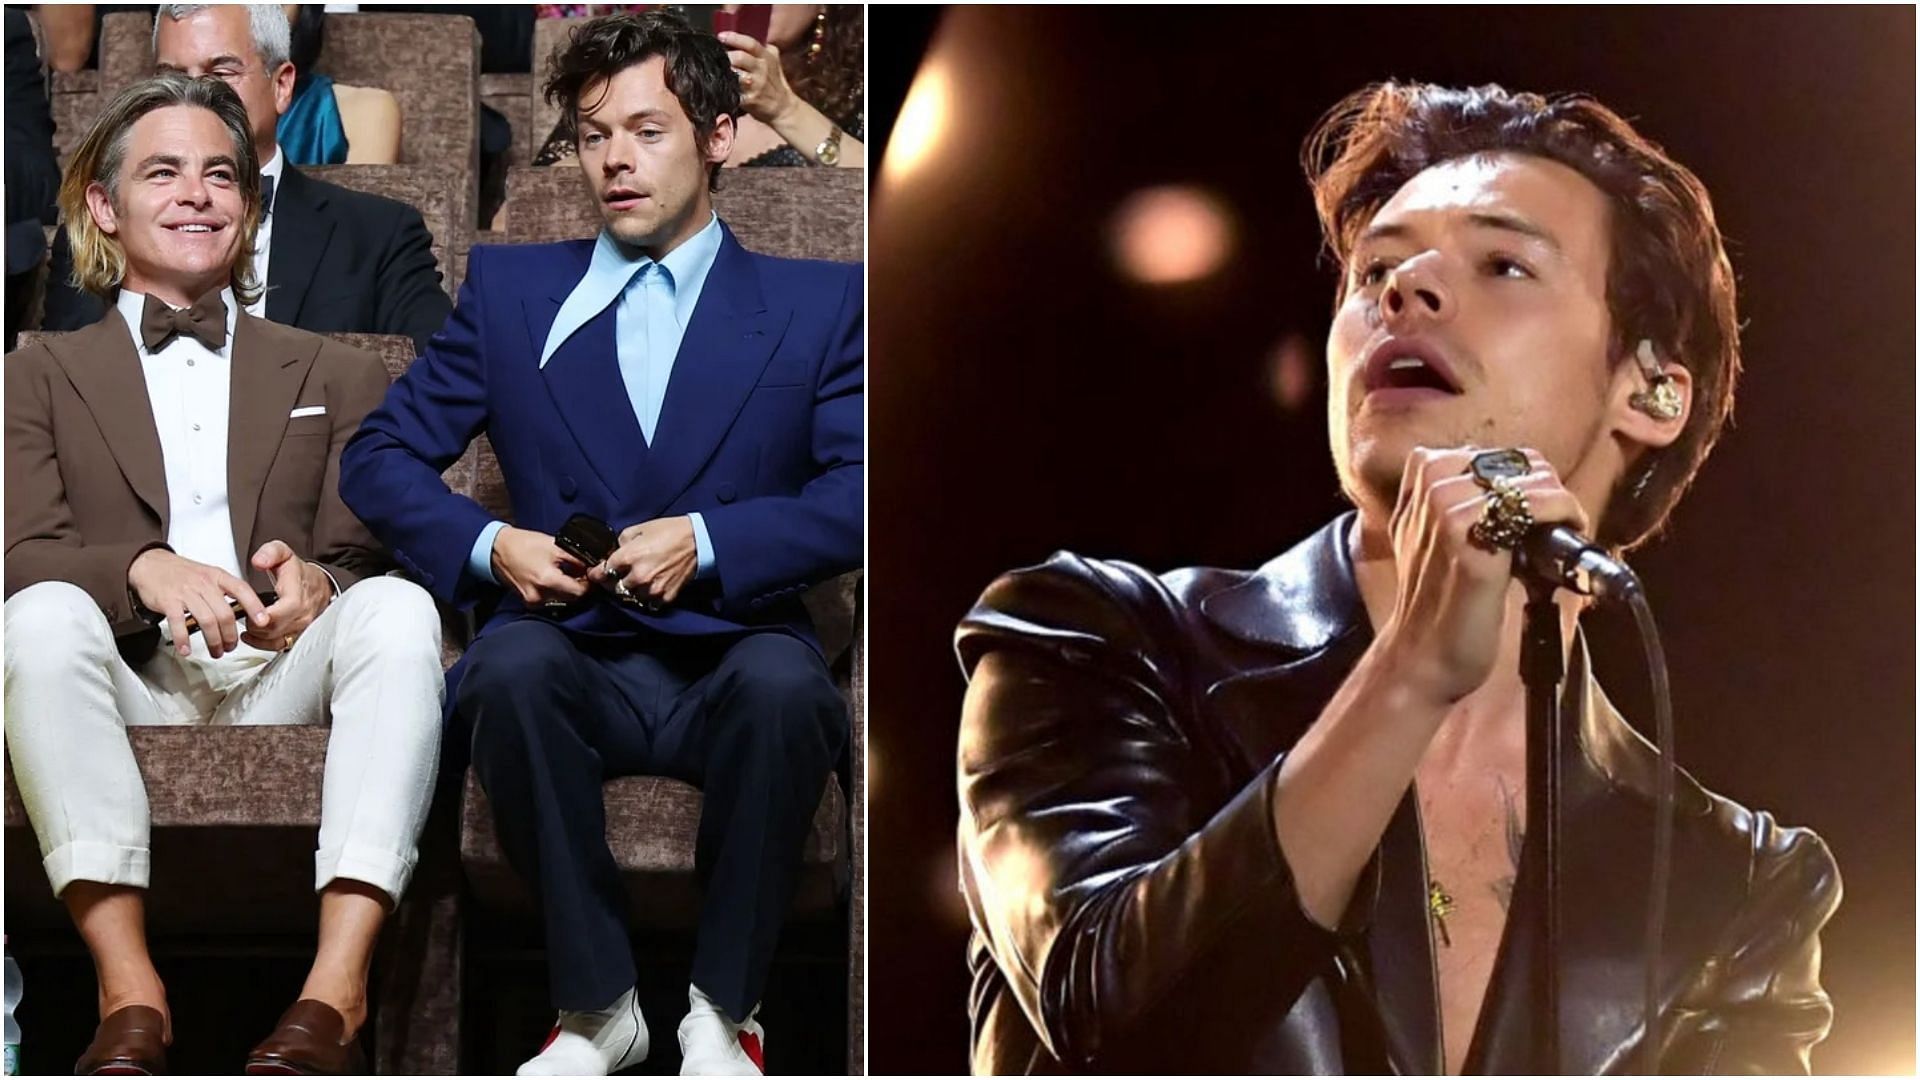 Harry Styles jokes about spitting on Chris Pine. (Images via Instagram / @hstyles and Vittorio Zunino Celotto / Getty)